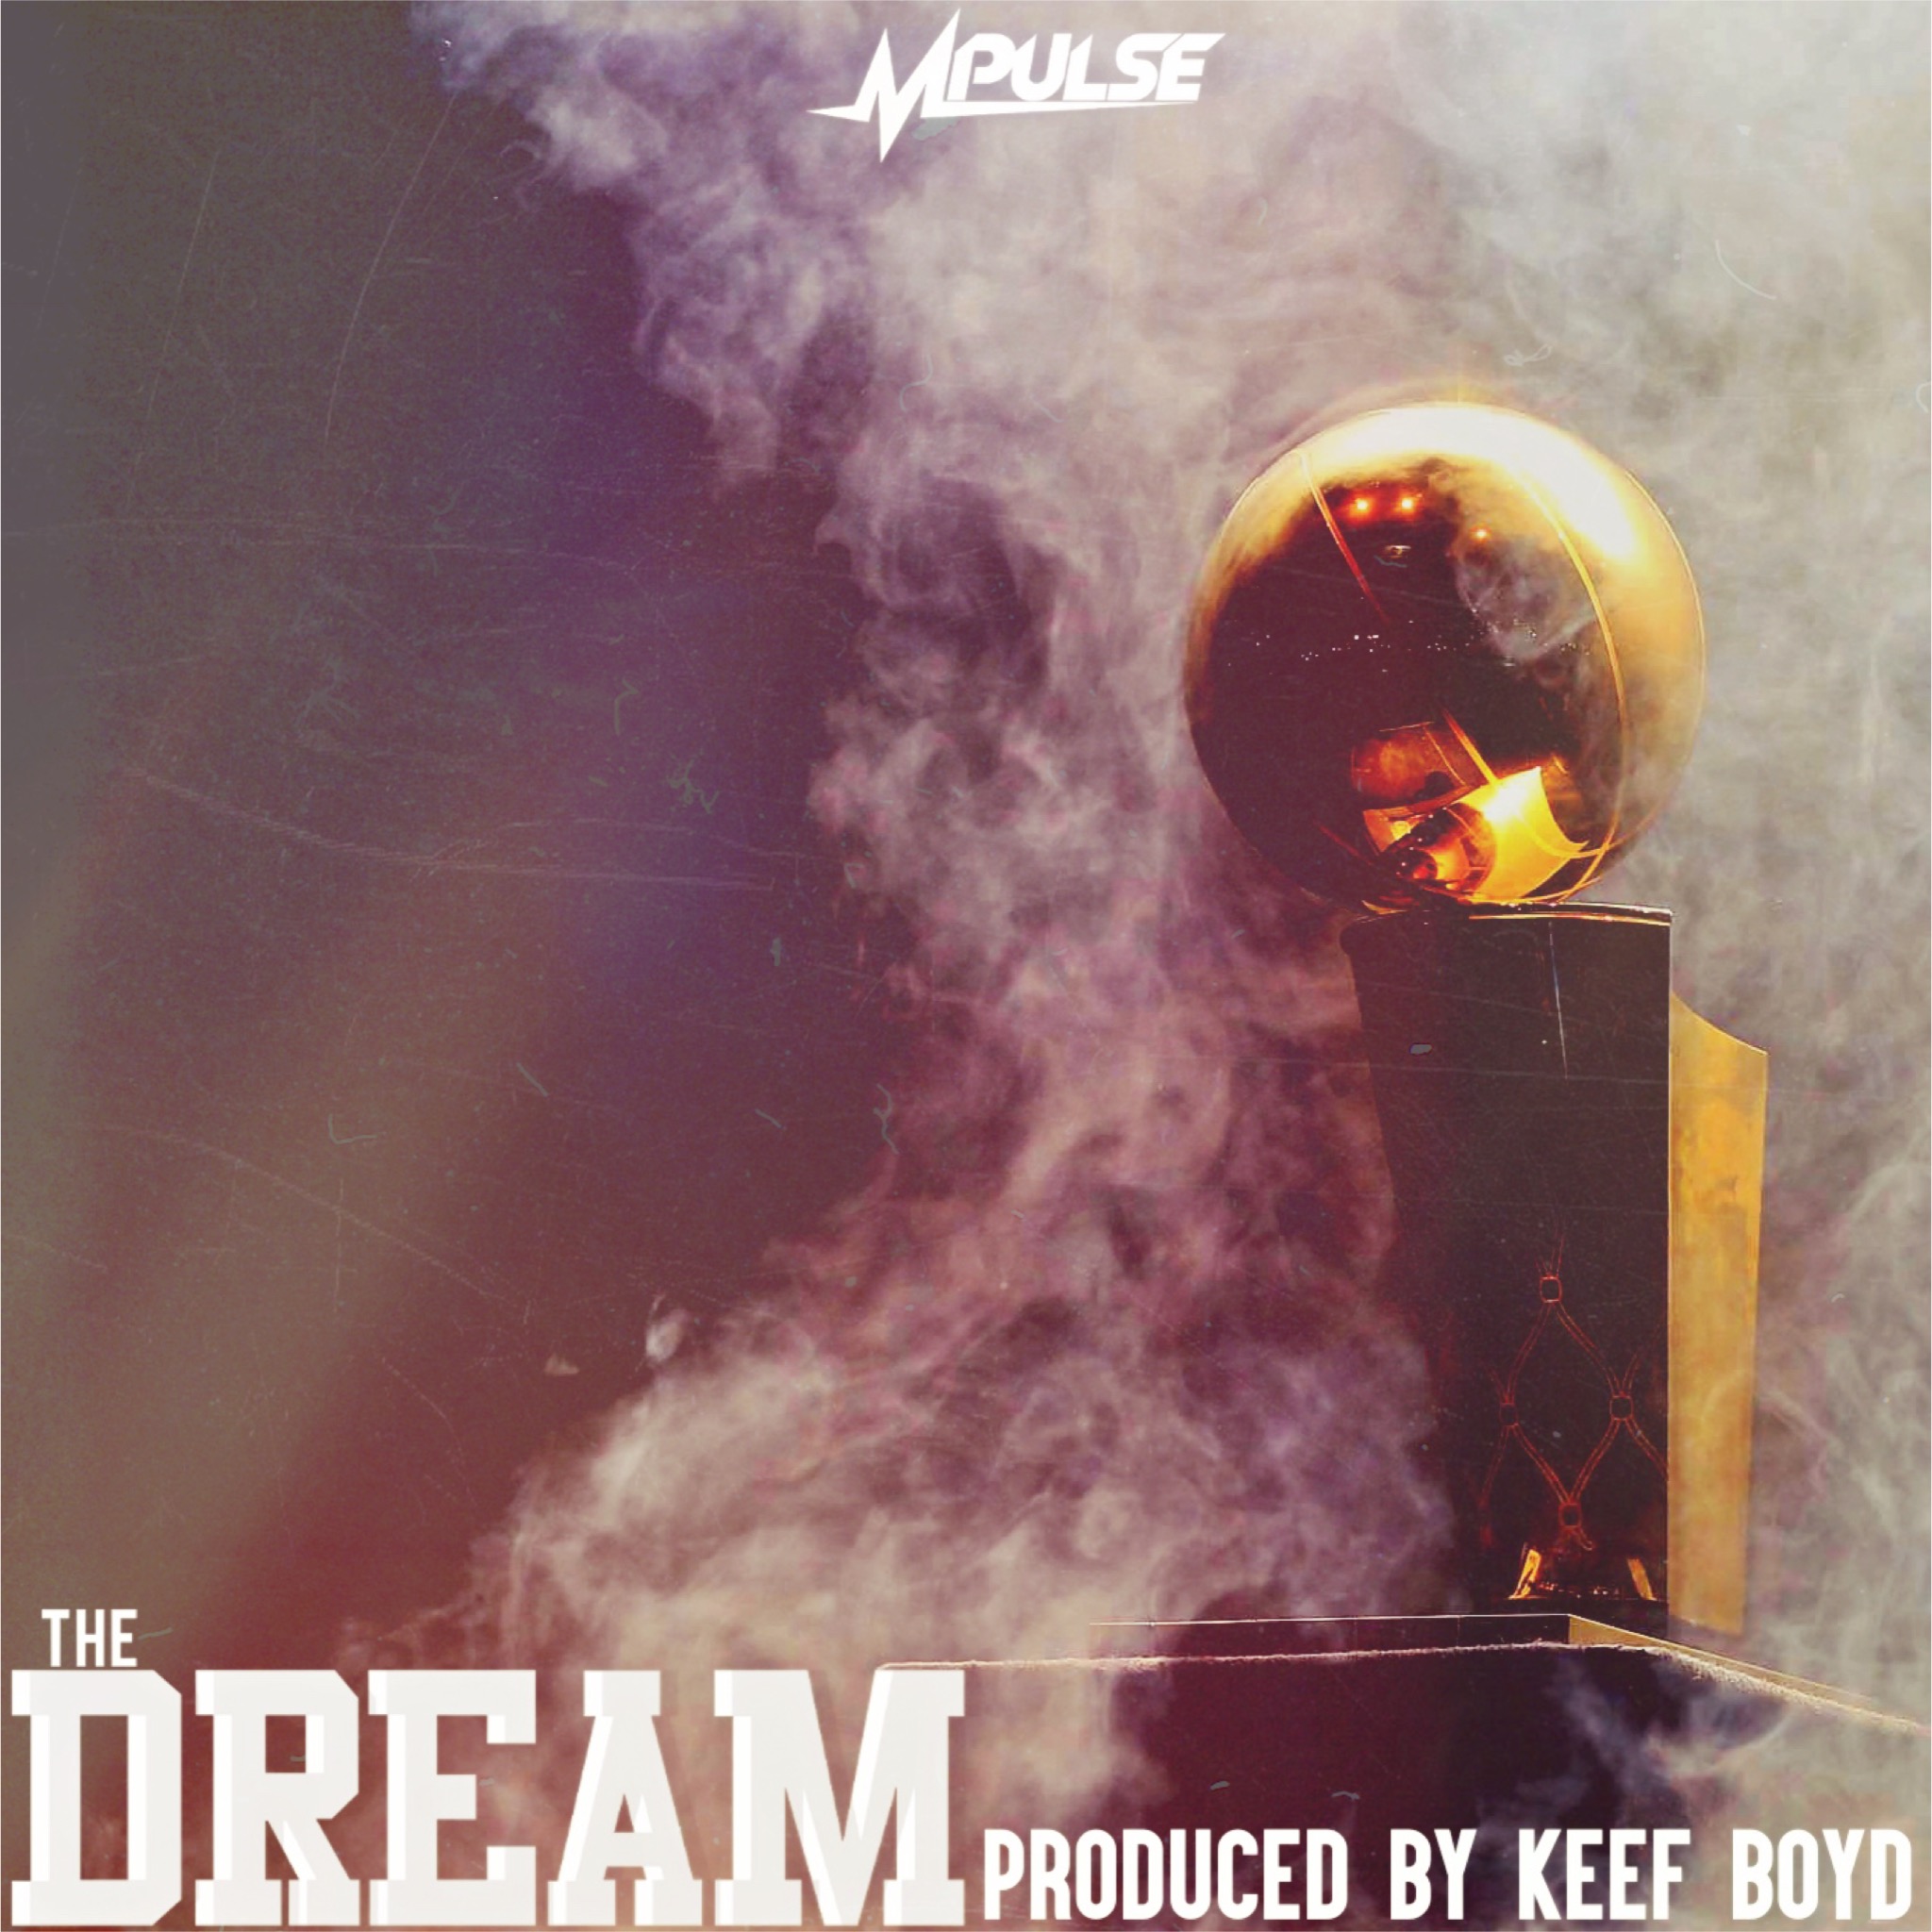 With A New Project On The Way Mpulse Release First Single, “The Dream”